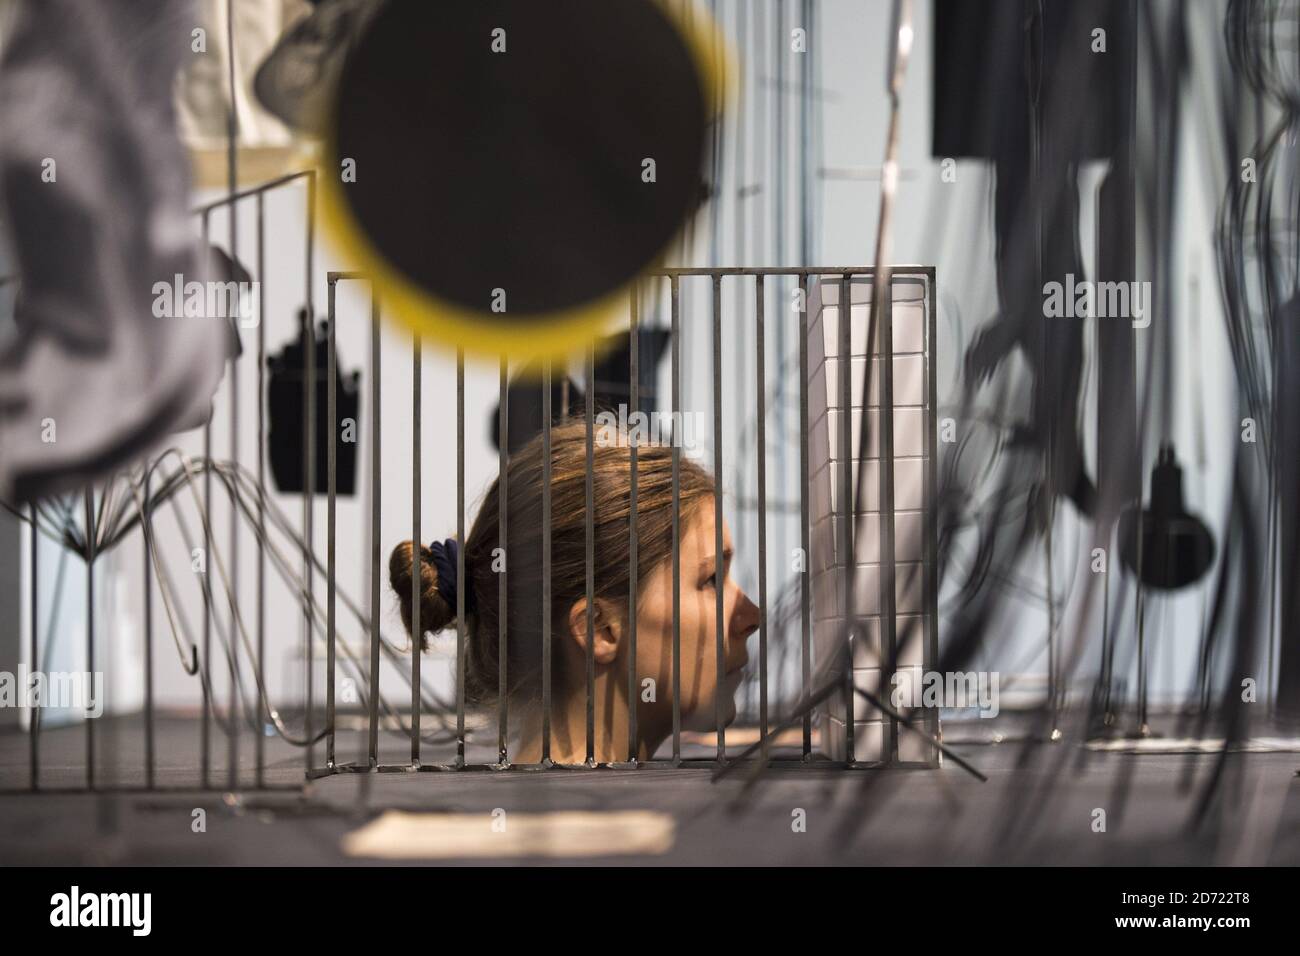 A detail from 'Asylum', by artist Eva Kot'atkova, on display at Bedlam: the asylum and beyond, at the Wellcome Collection in London. The exhibition juxtaposes historical material with artists' works which reflect or re-imagine the institution.  Stock Photo